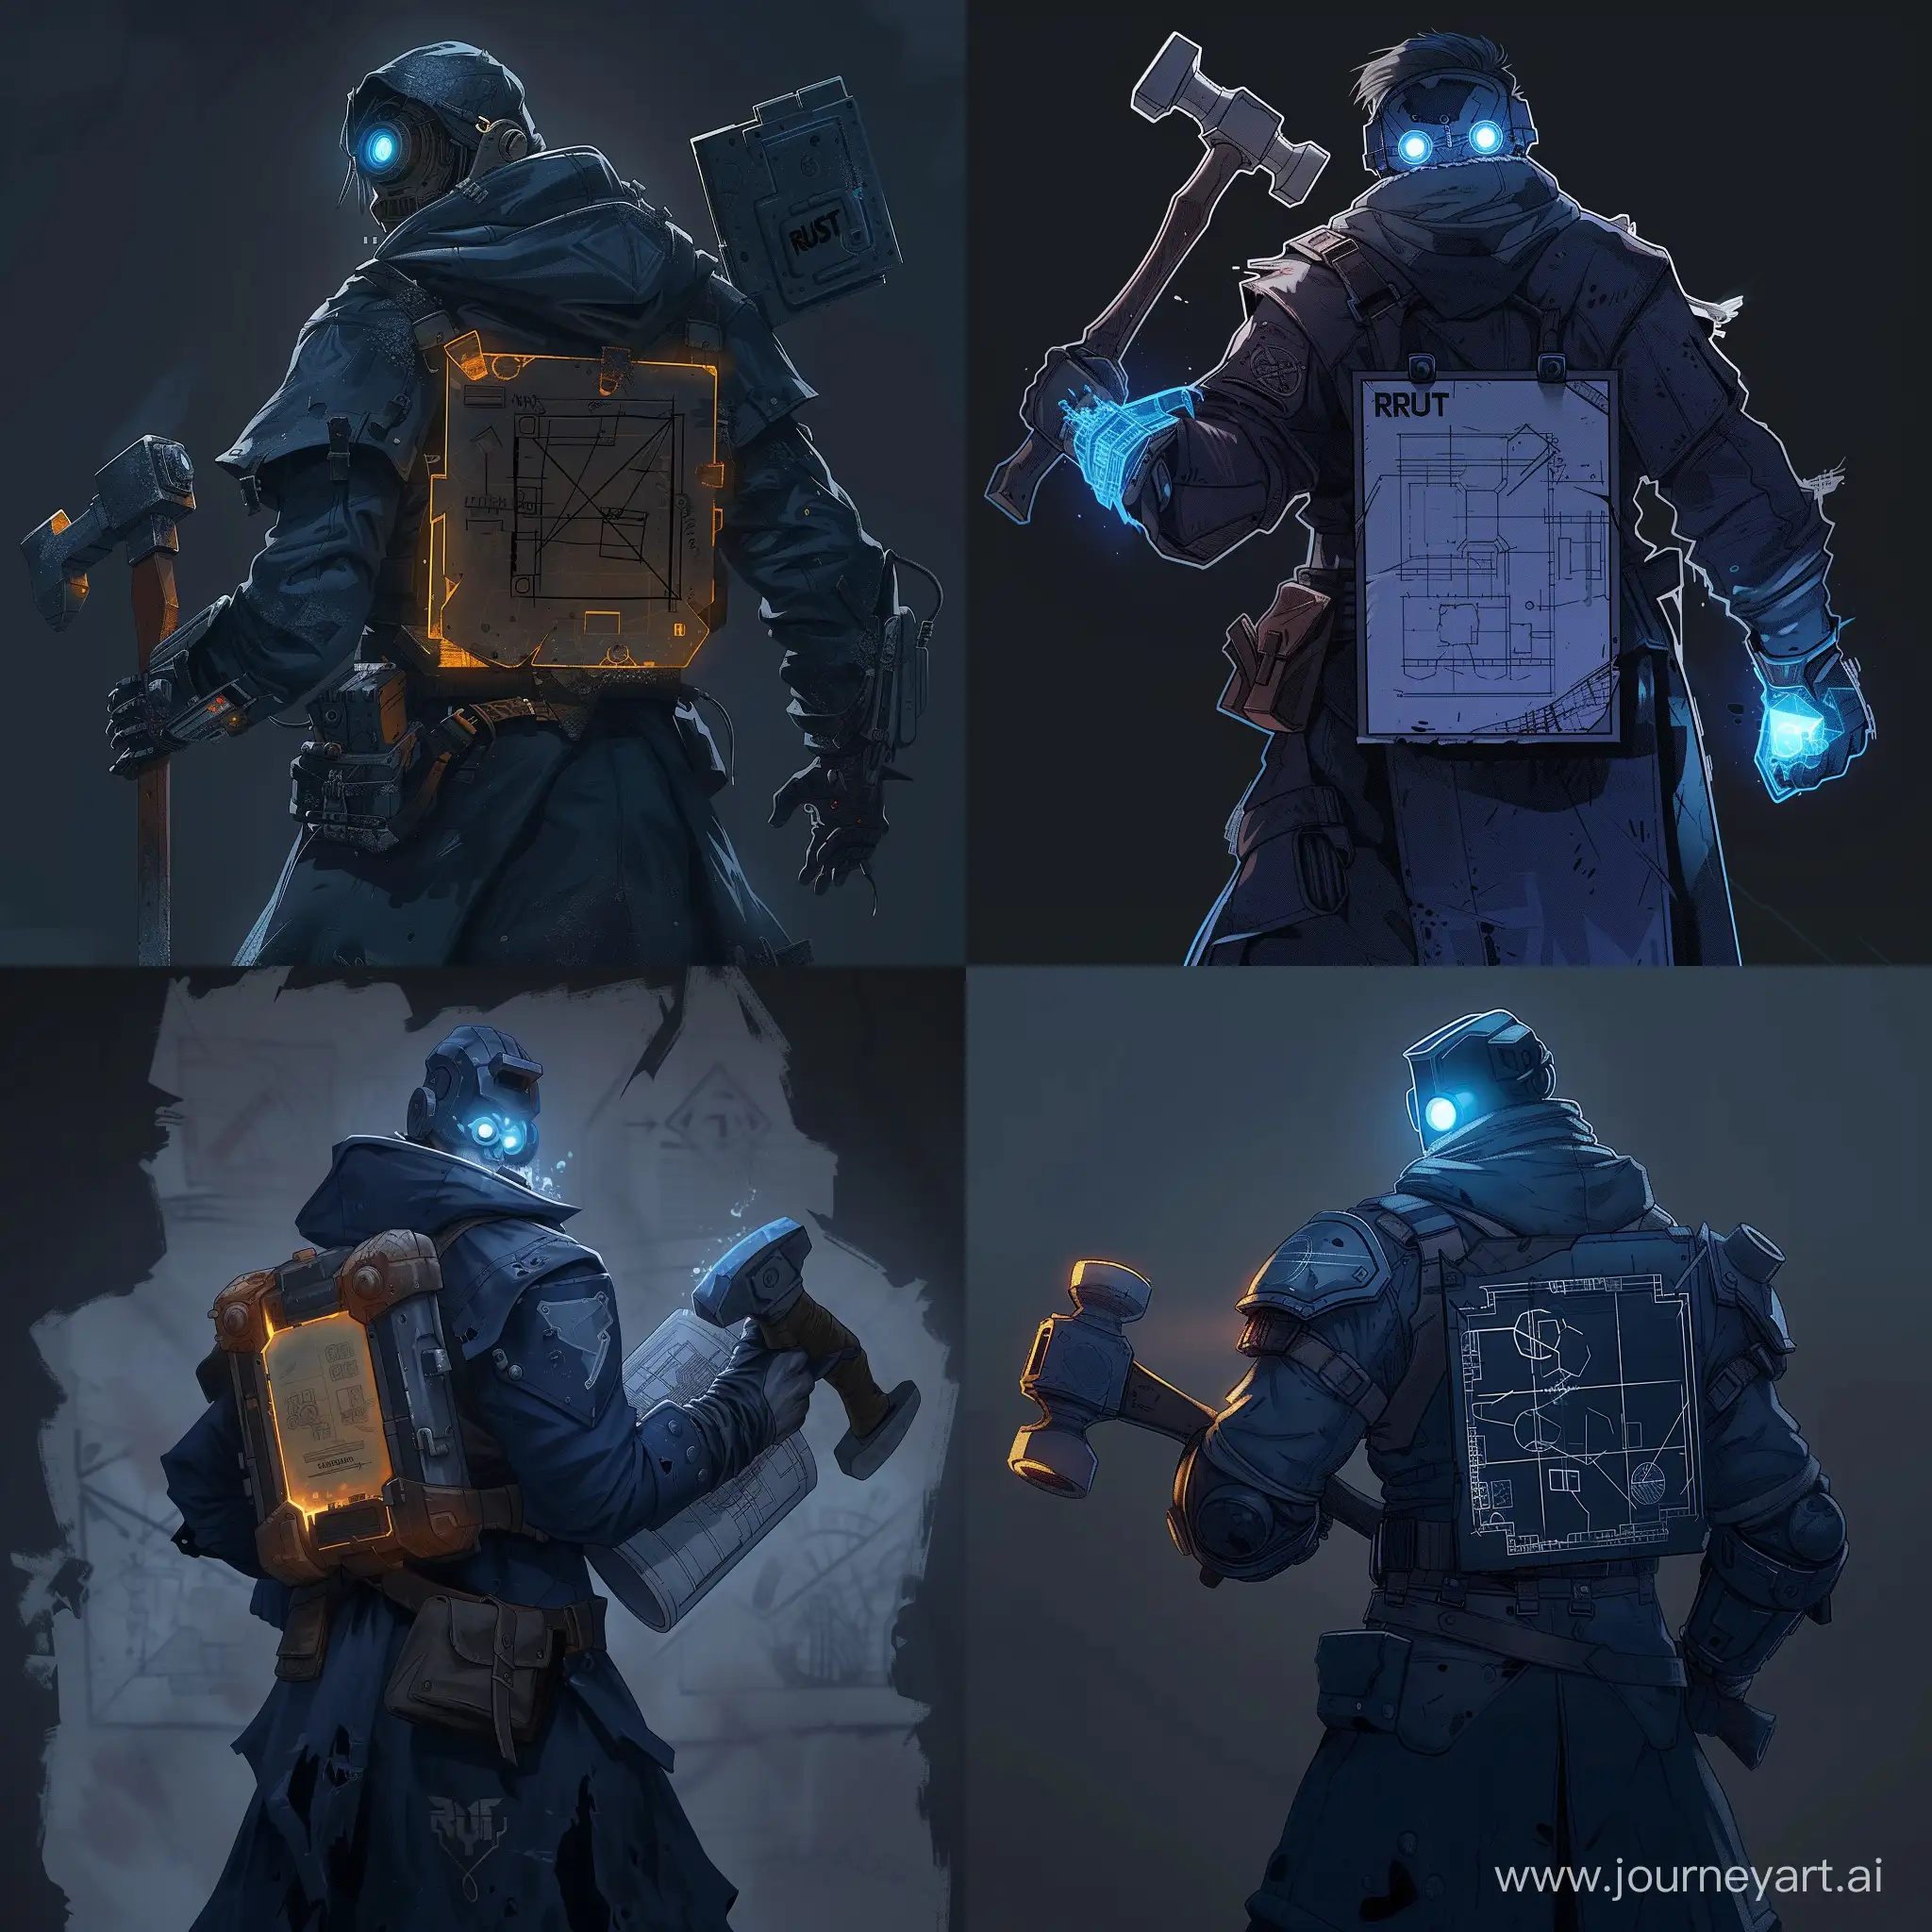  character from game "RUST" dressed in a dark-blue uniform and holding hammer in hands, has glowing eyes, and a long jacket, there is a blueprint on the back of him.